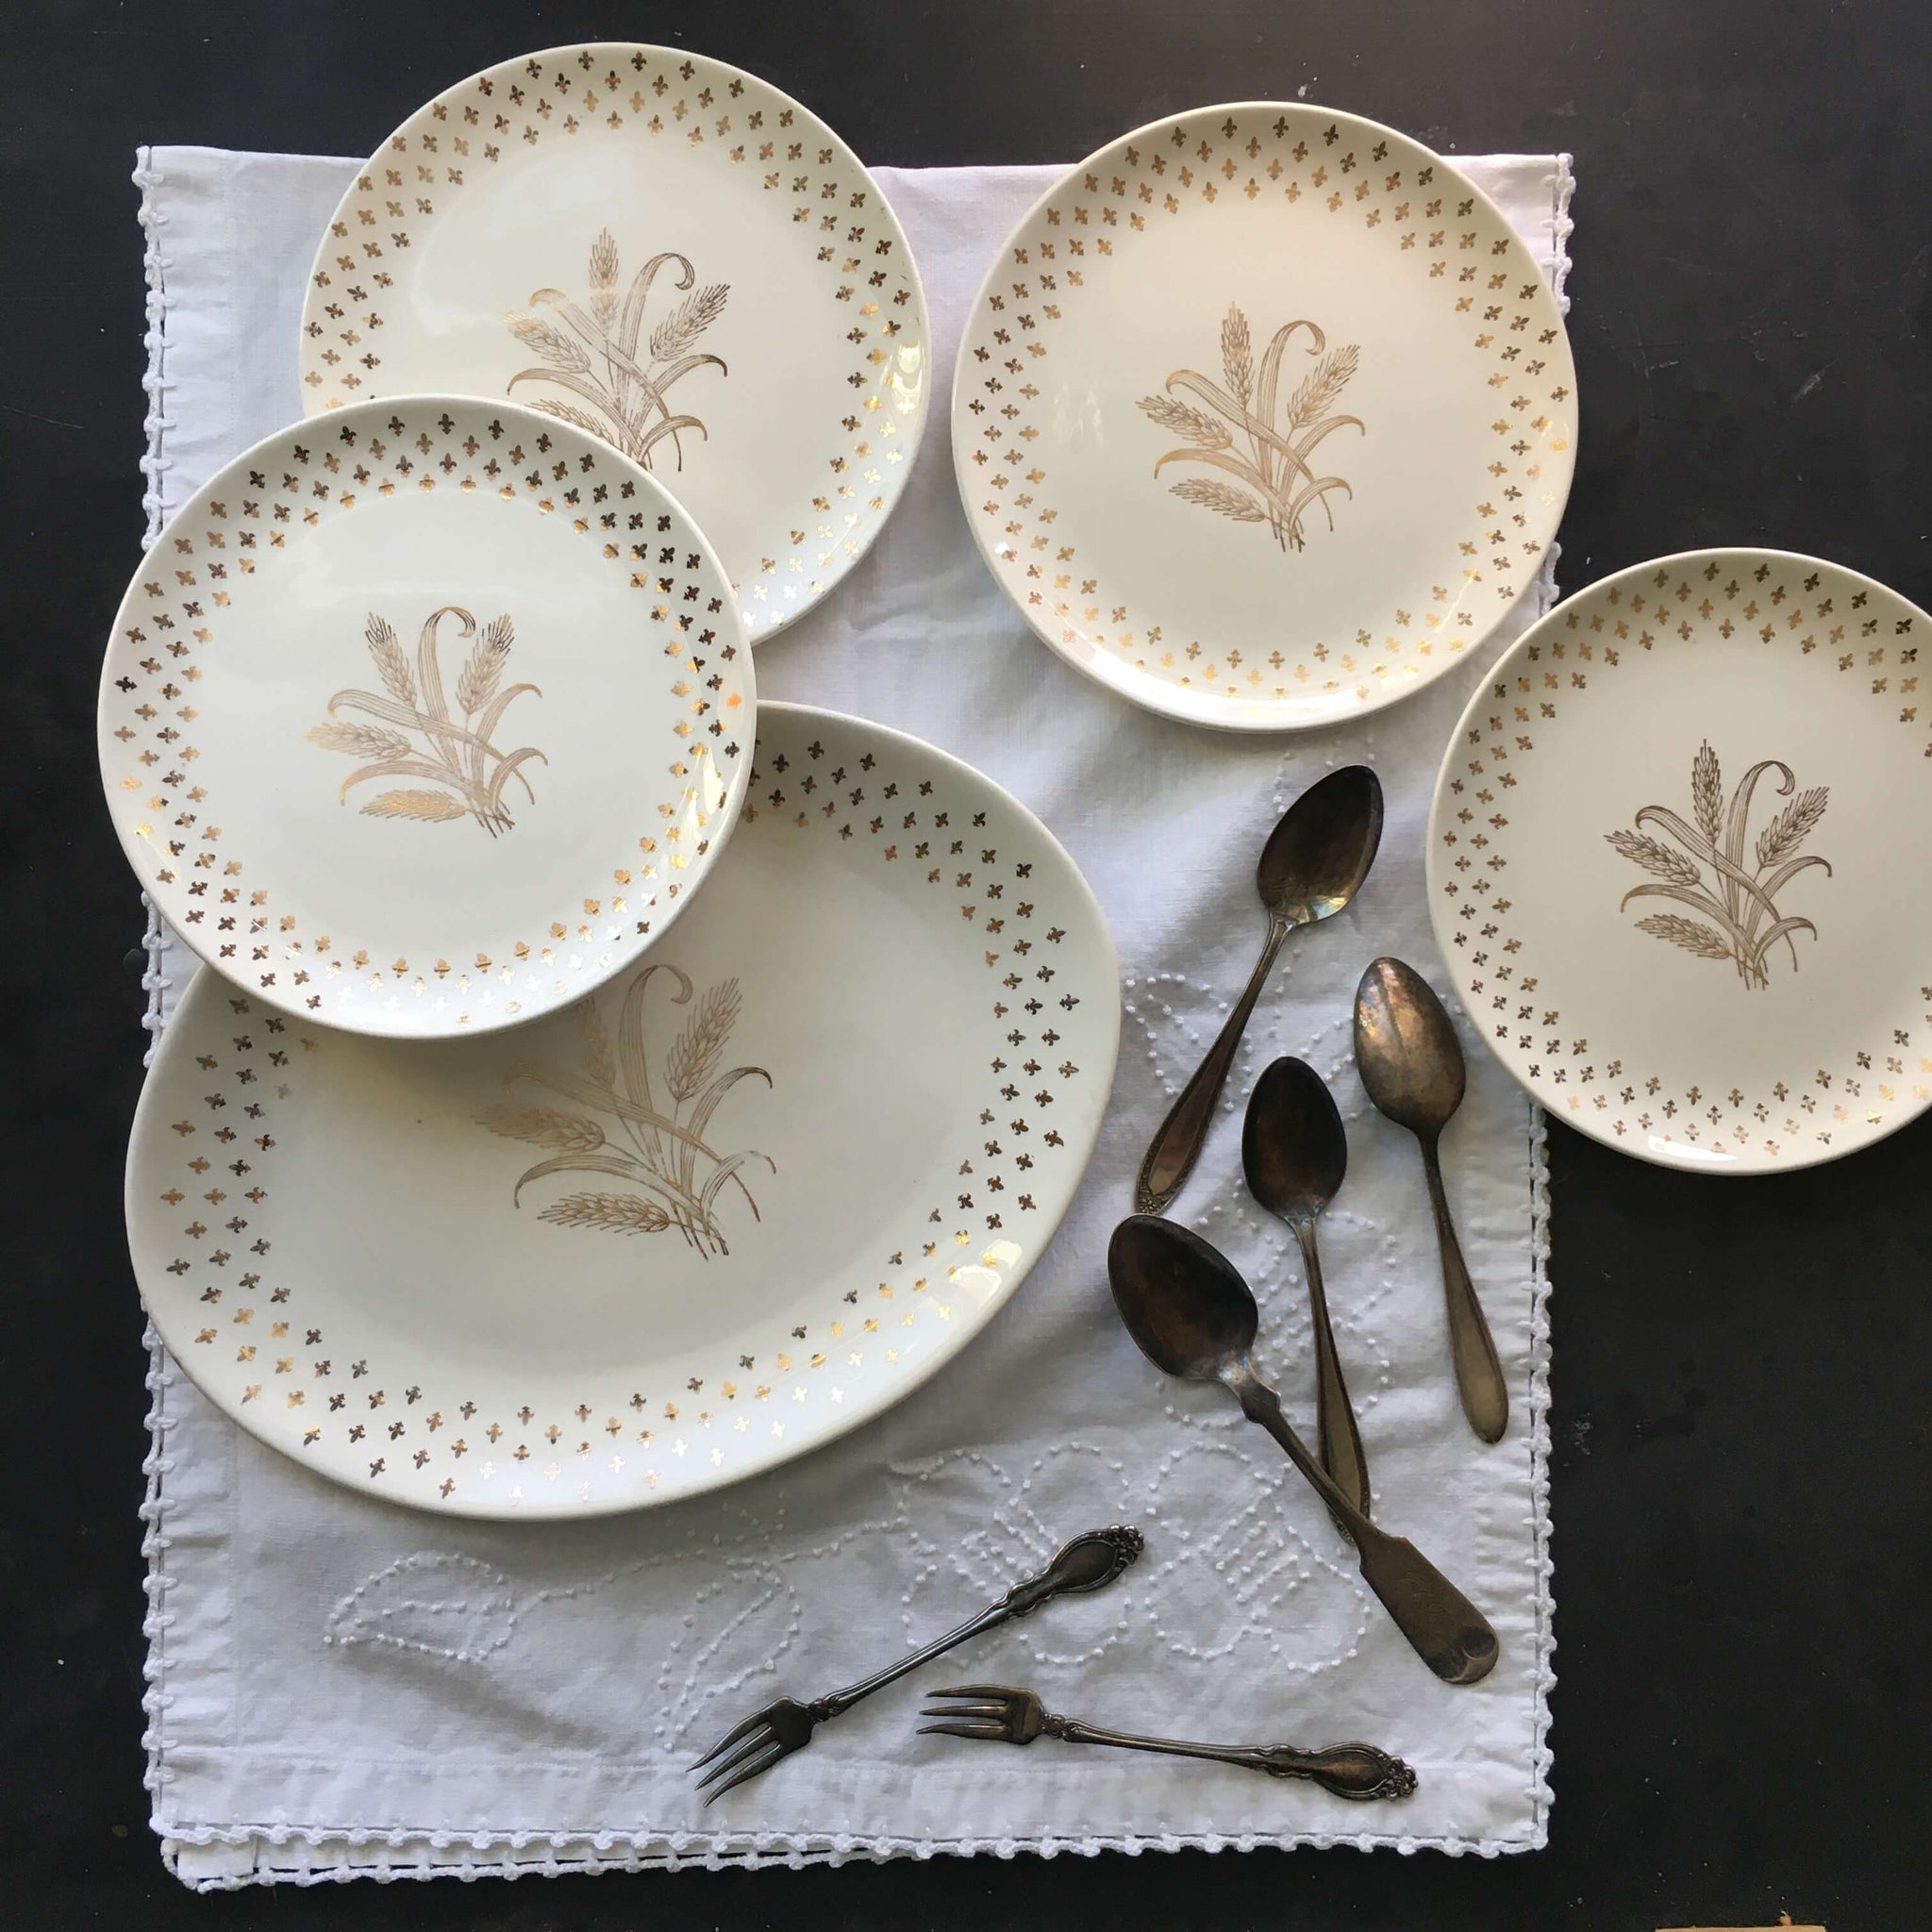 Vintage Wheat and Fleur De Lis Serving Set -  Platter and Four Small Plates  - RESERVED FOR MONICA